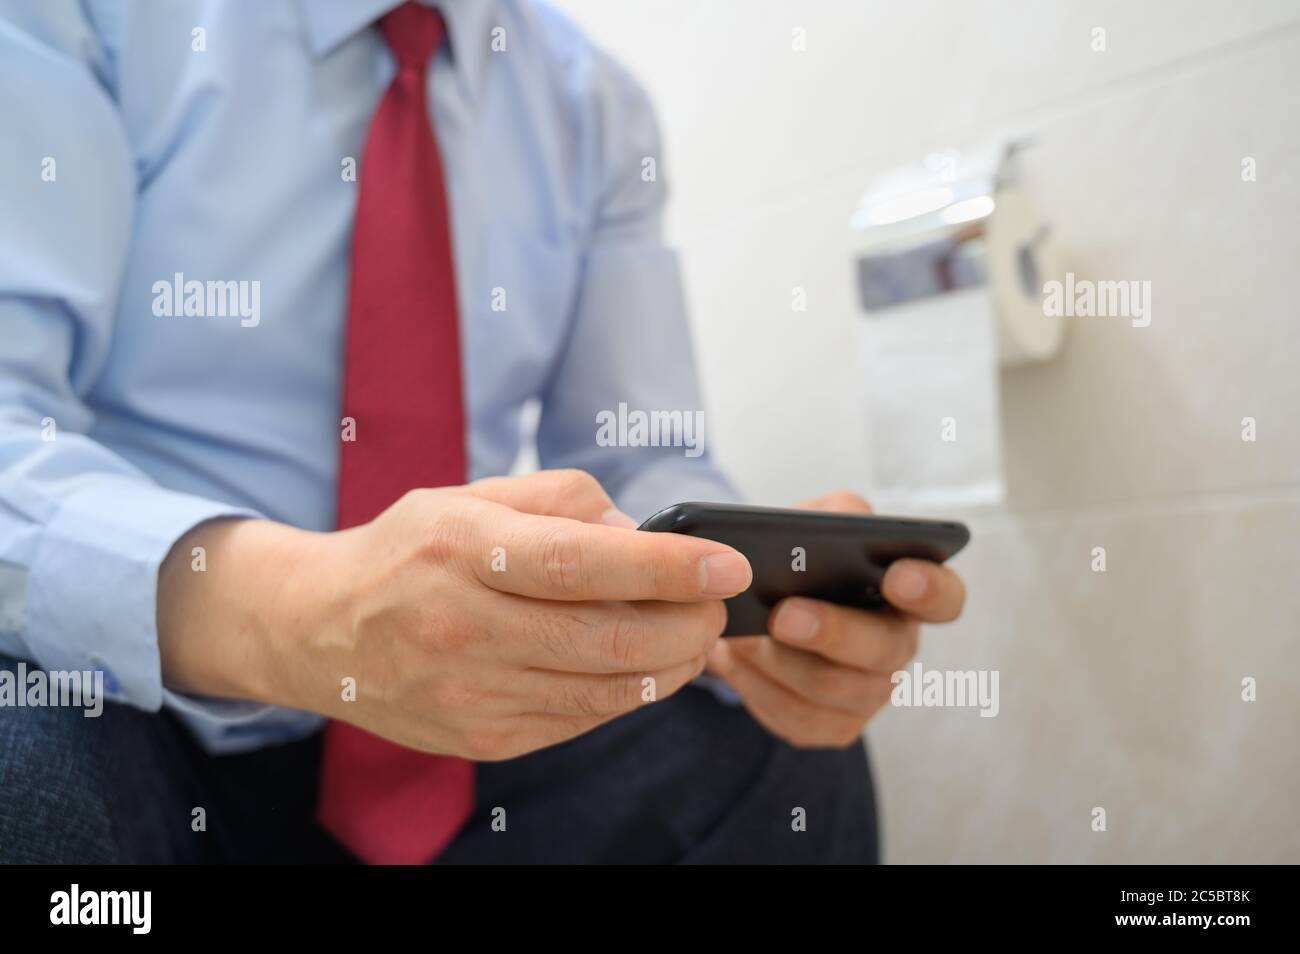 Businessman sitting on the toilet in the bathroom and using a smartphone. Stock Photo